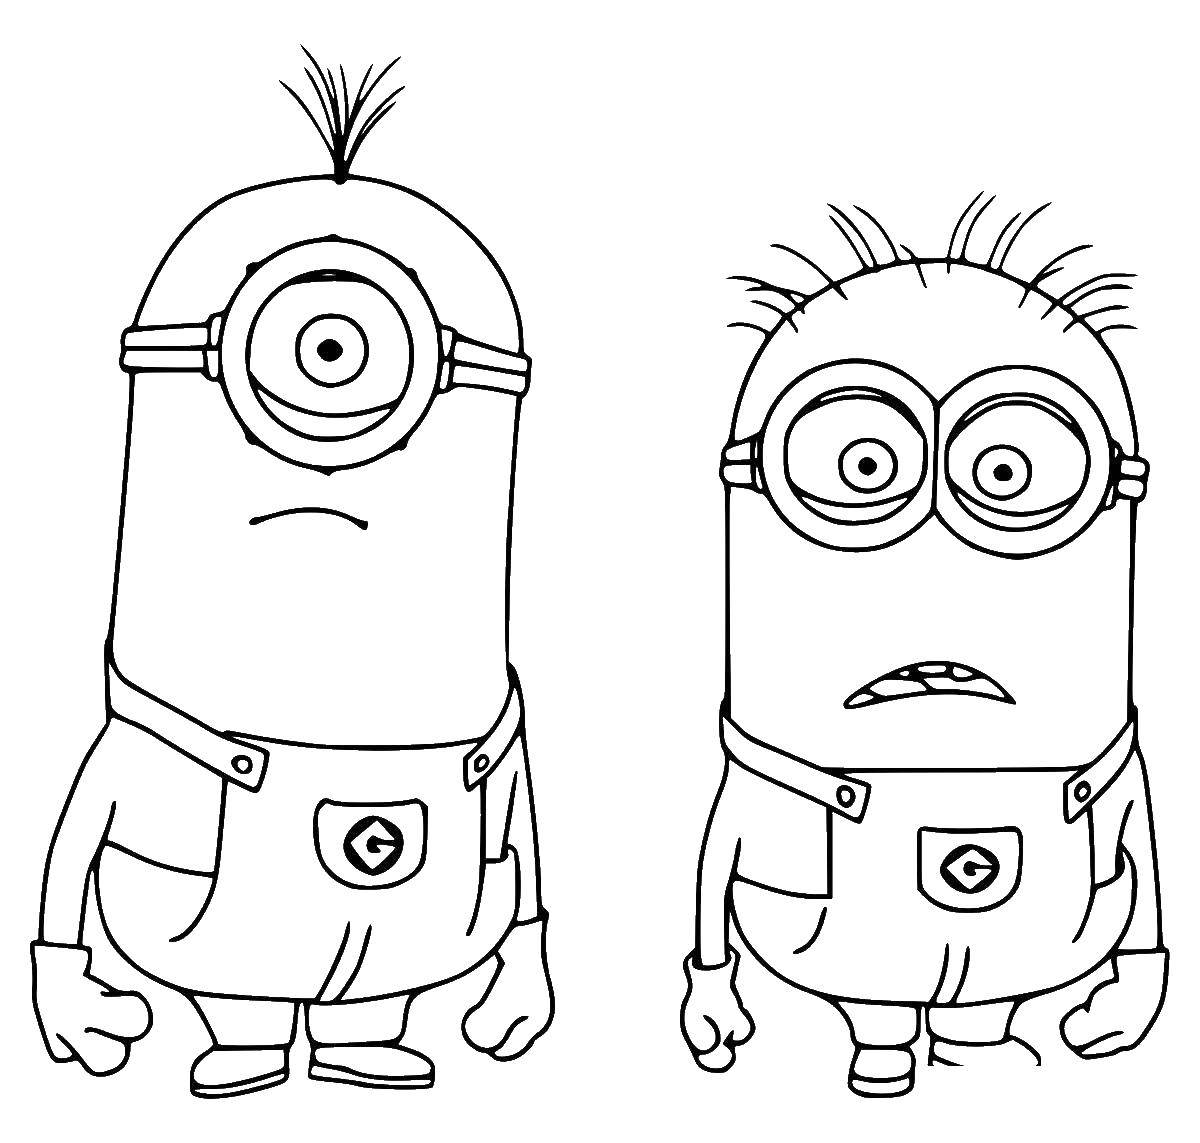 Coloring The surprised minion. Category the minions. Tags:  the minions.